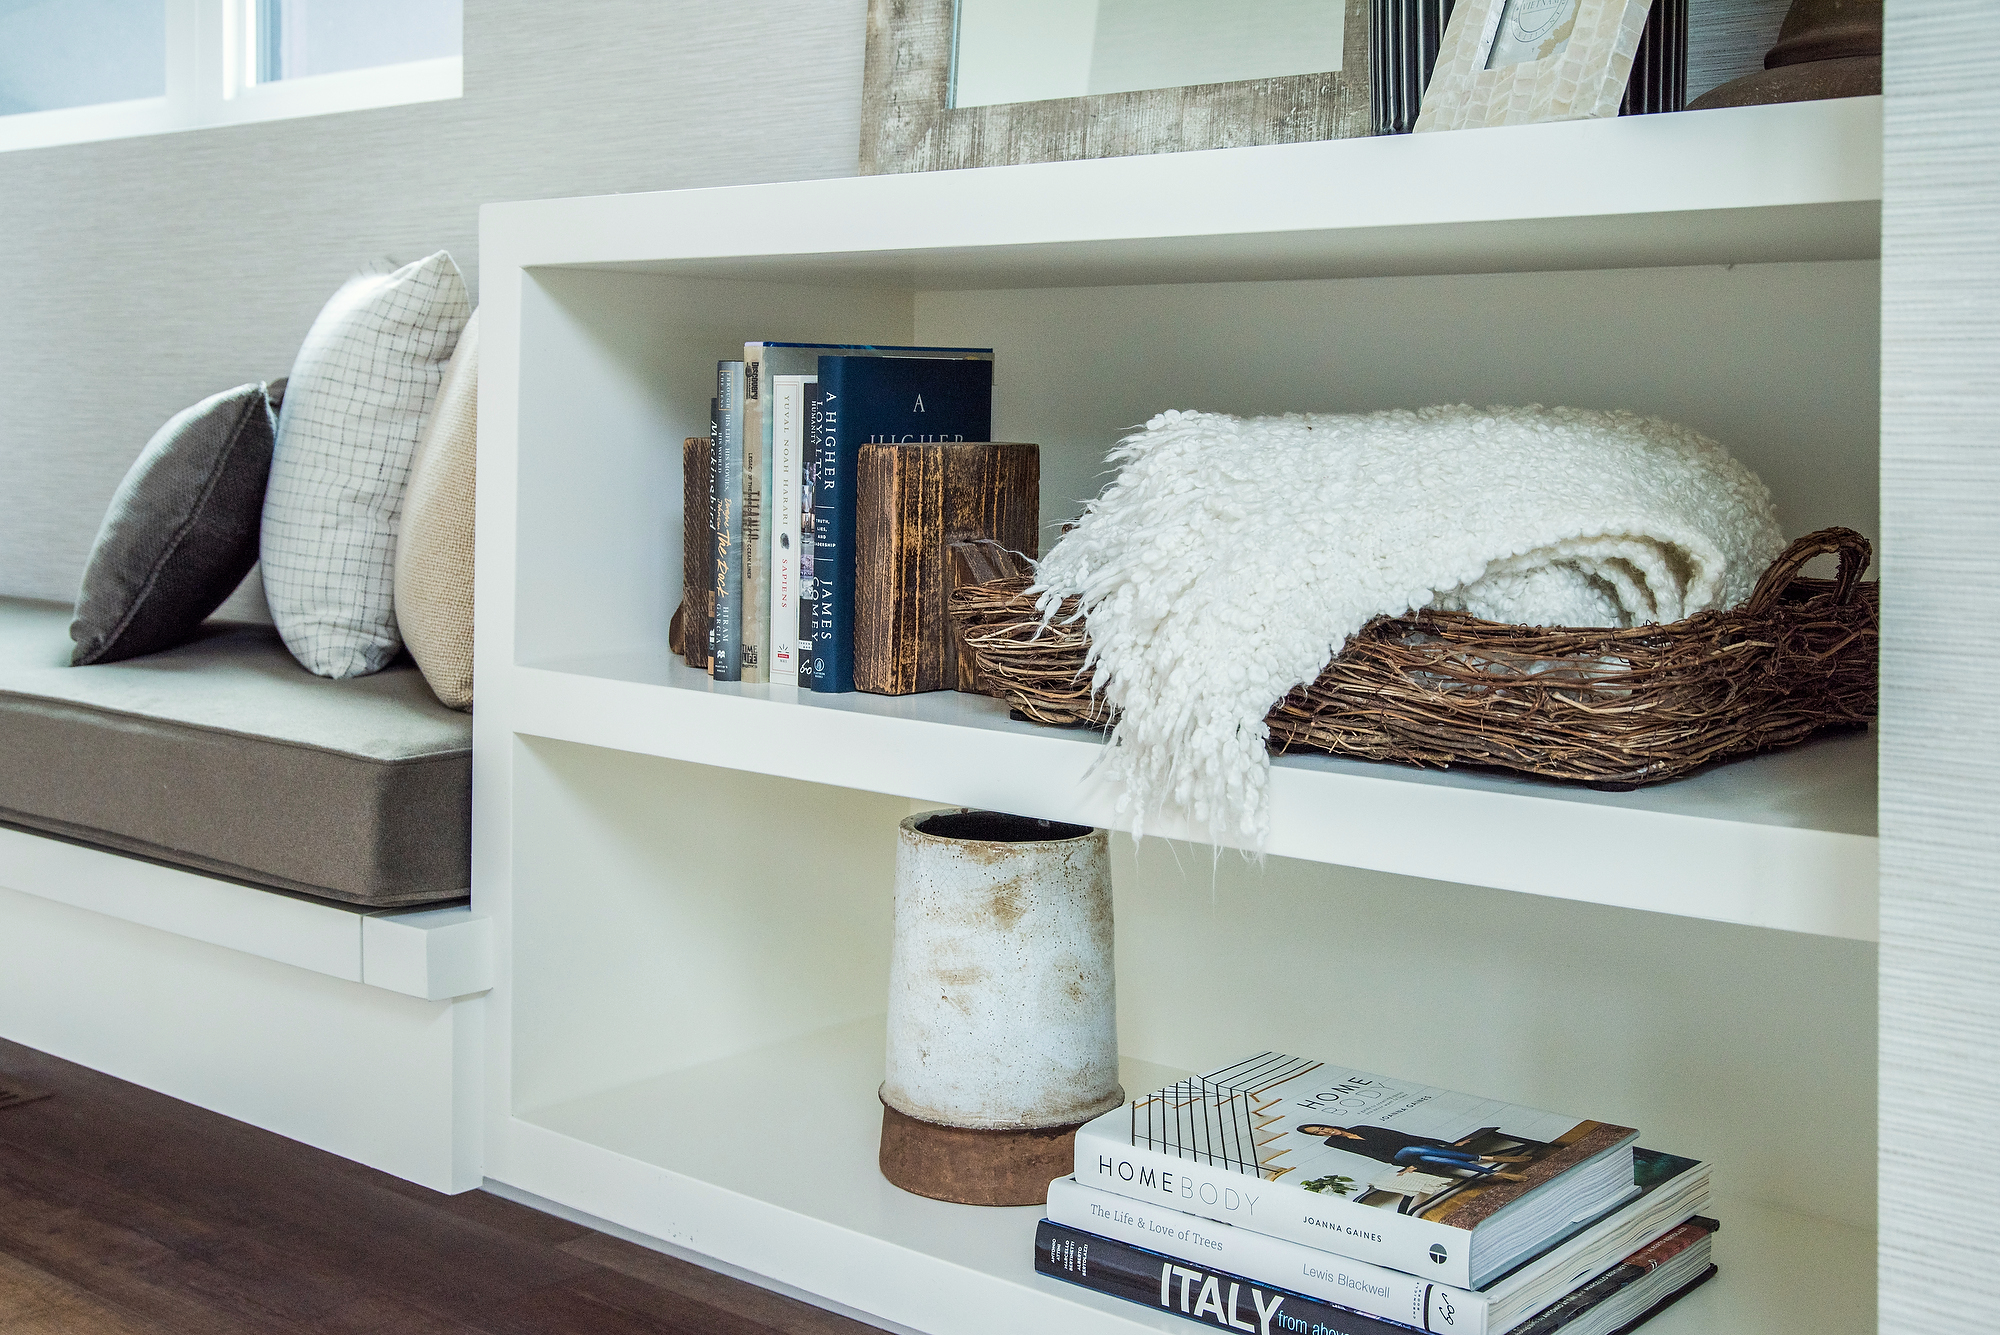 Personal decorative objects such as books, a blanket and a basket of clients used to interior style and decorate a reading niche in their new home.